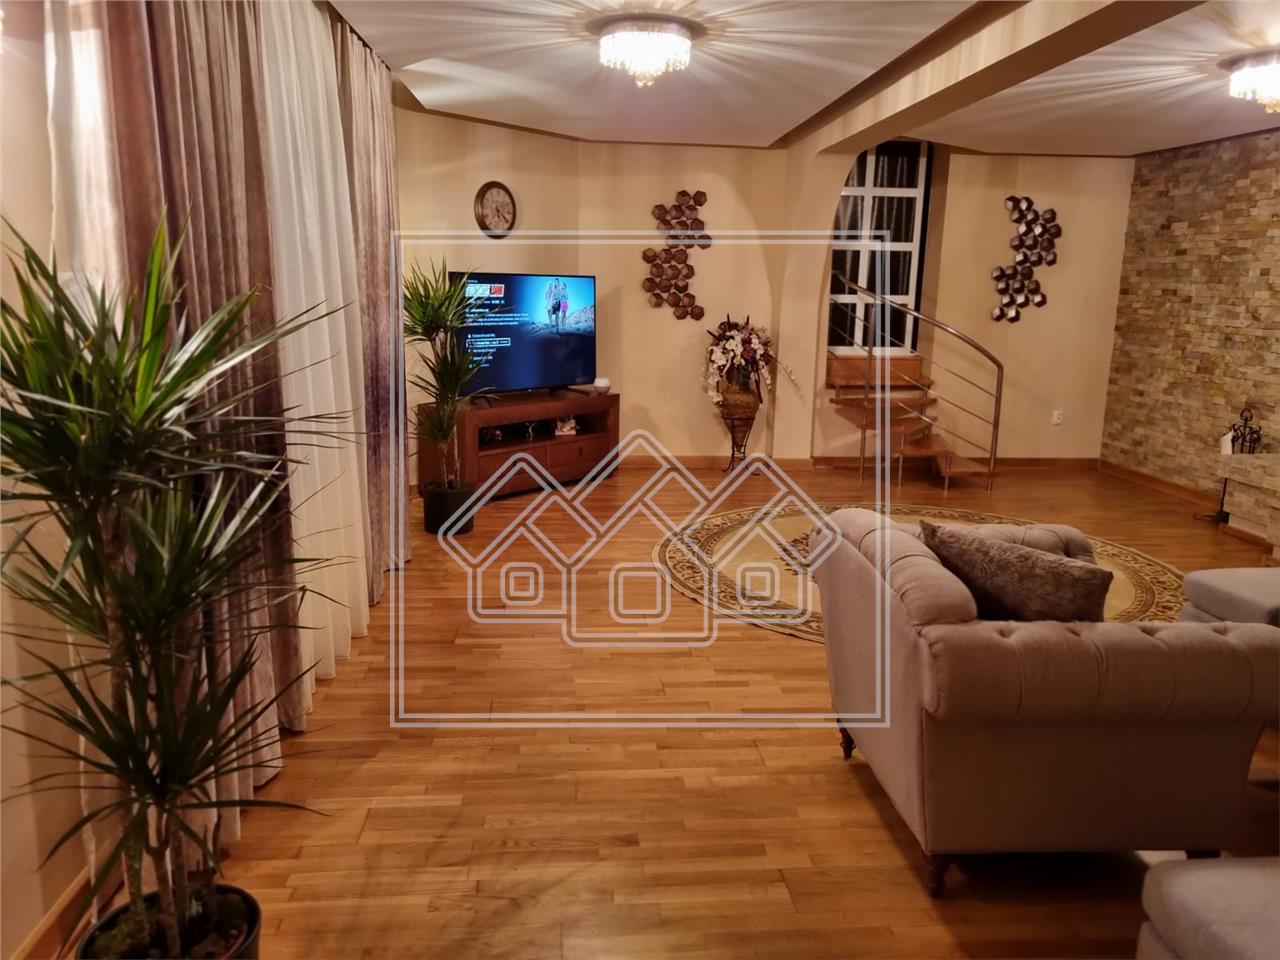 House for sale in Sibiu - Individual - 7 rooms, land and garage